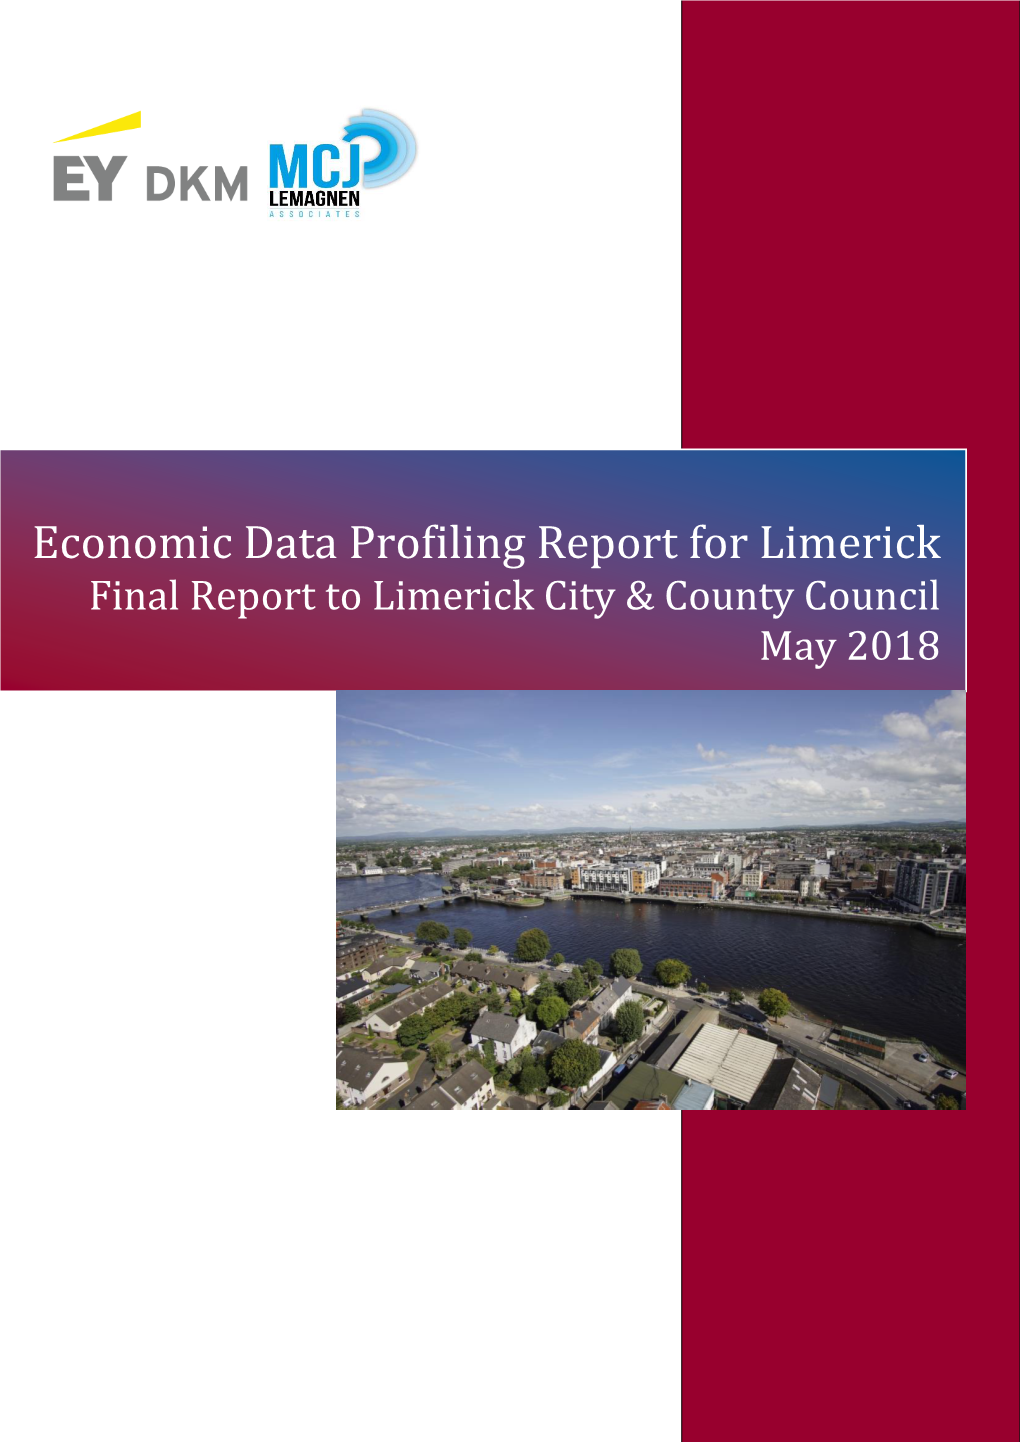 Economic Profiling Report for Limerick City and County